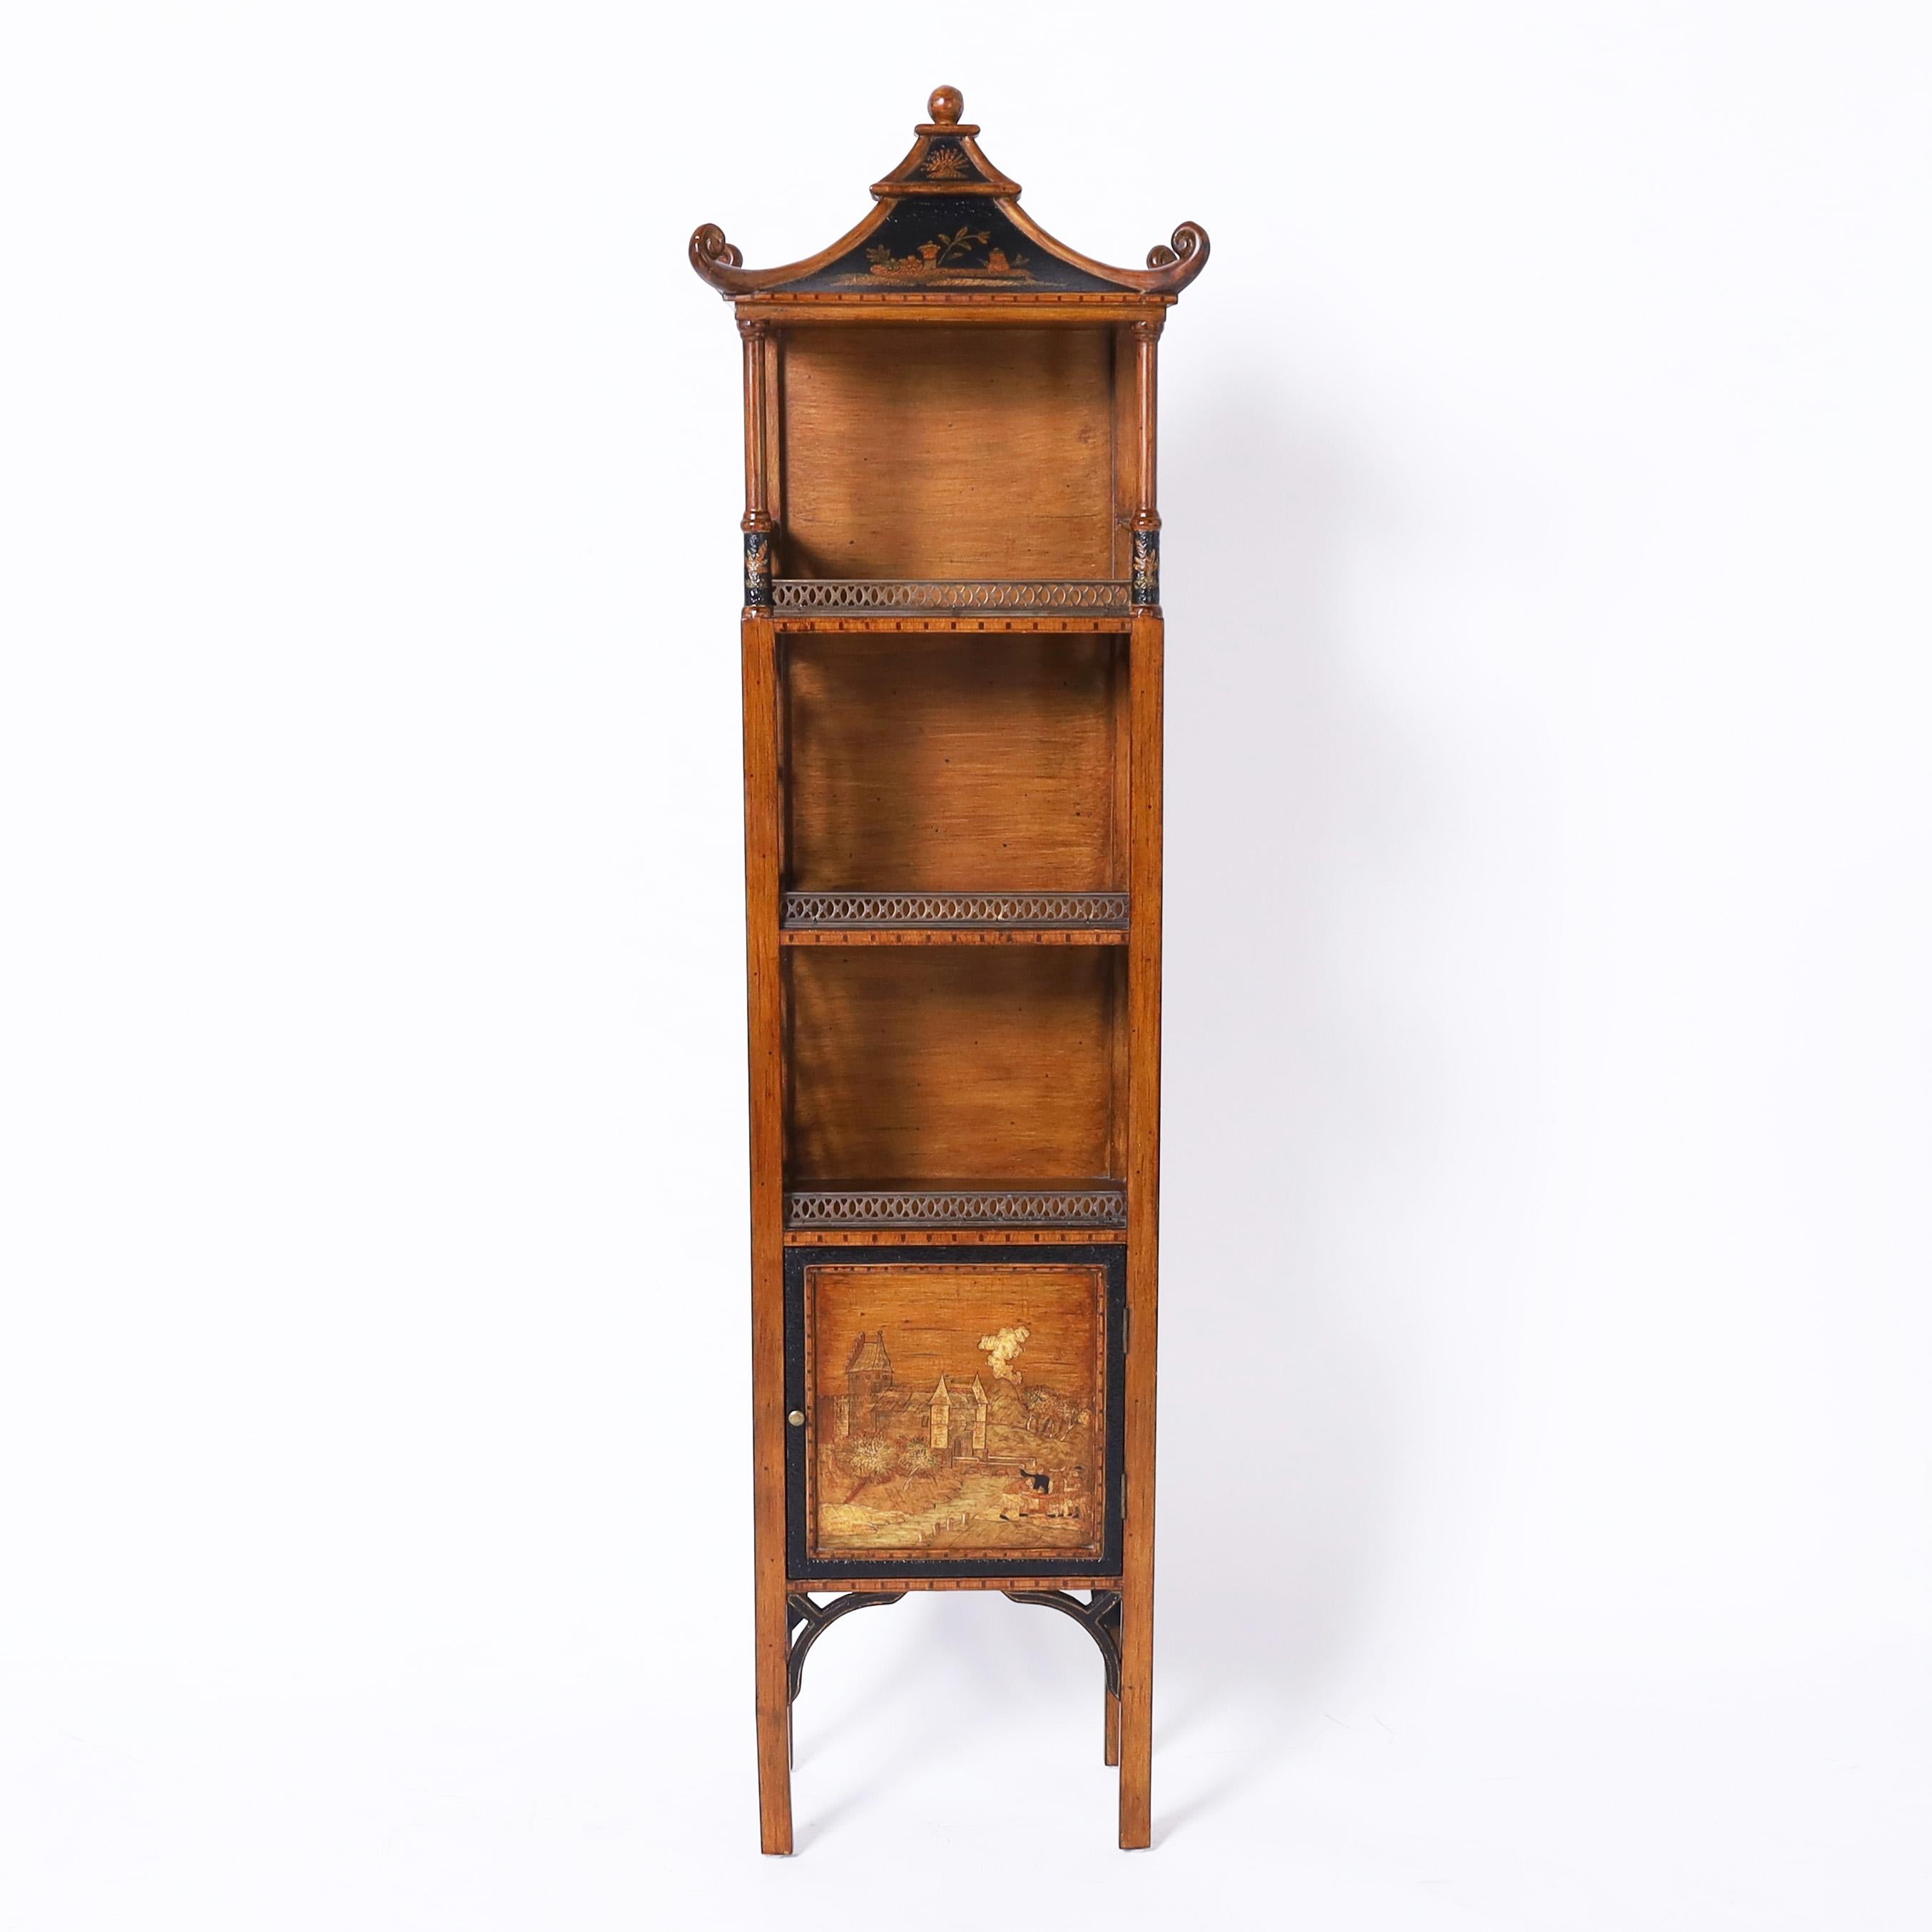 Enchanting vintage etagere crafted in hardwood with painted grain featuring a pagoda top over three shelves with brass galleries and Chinese Chippendale sides on a cabinet with hand painted chinoiserie and ming style legs.